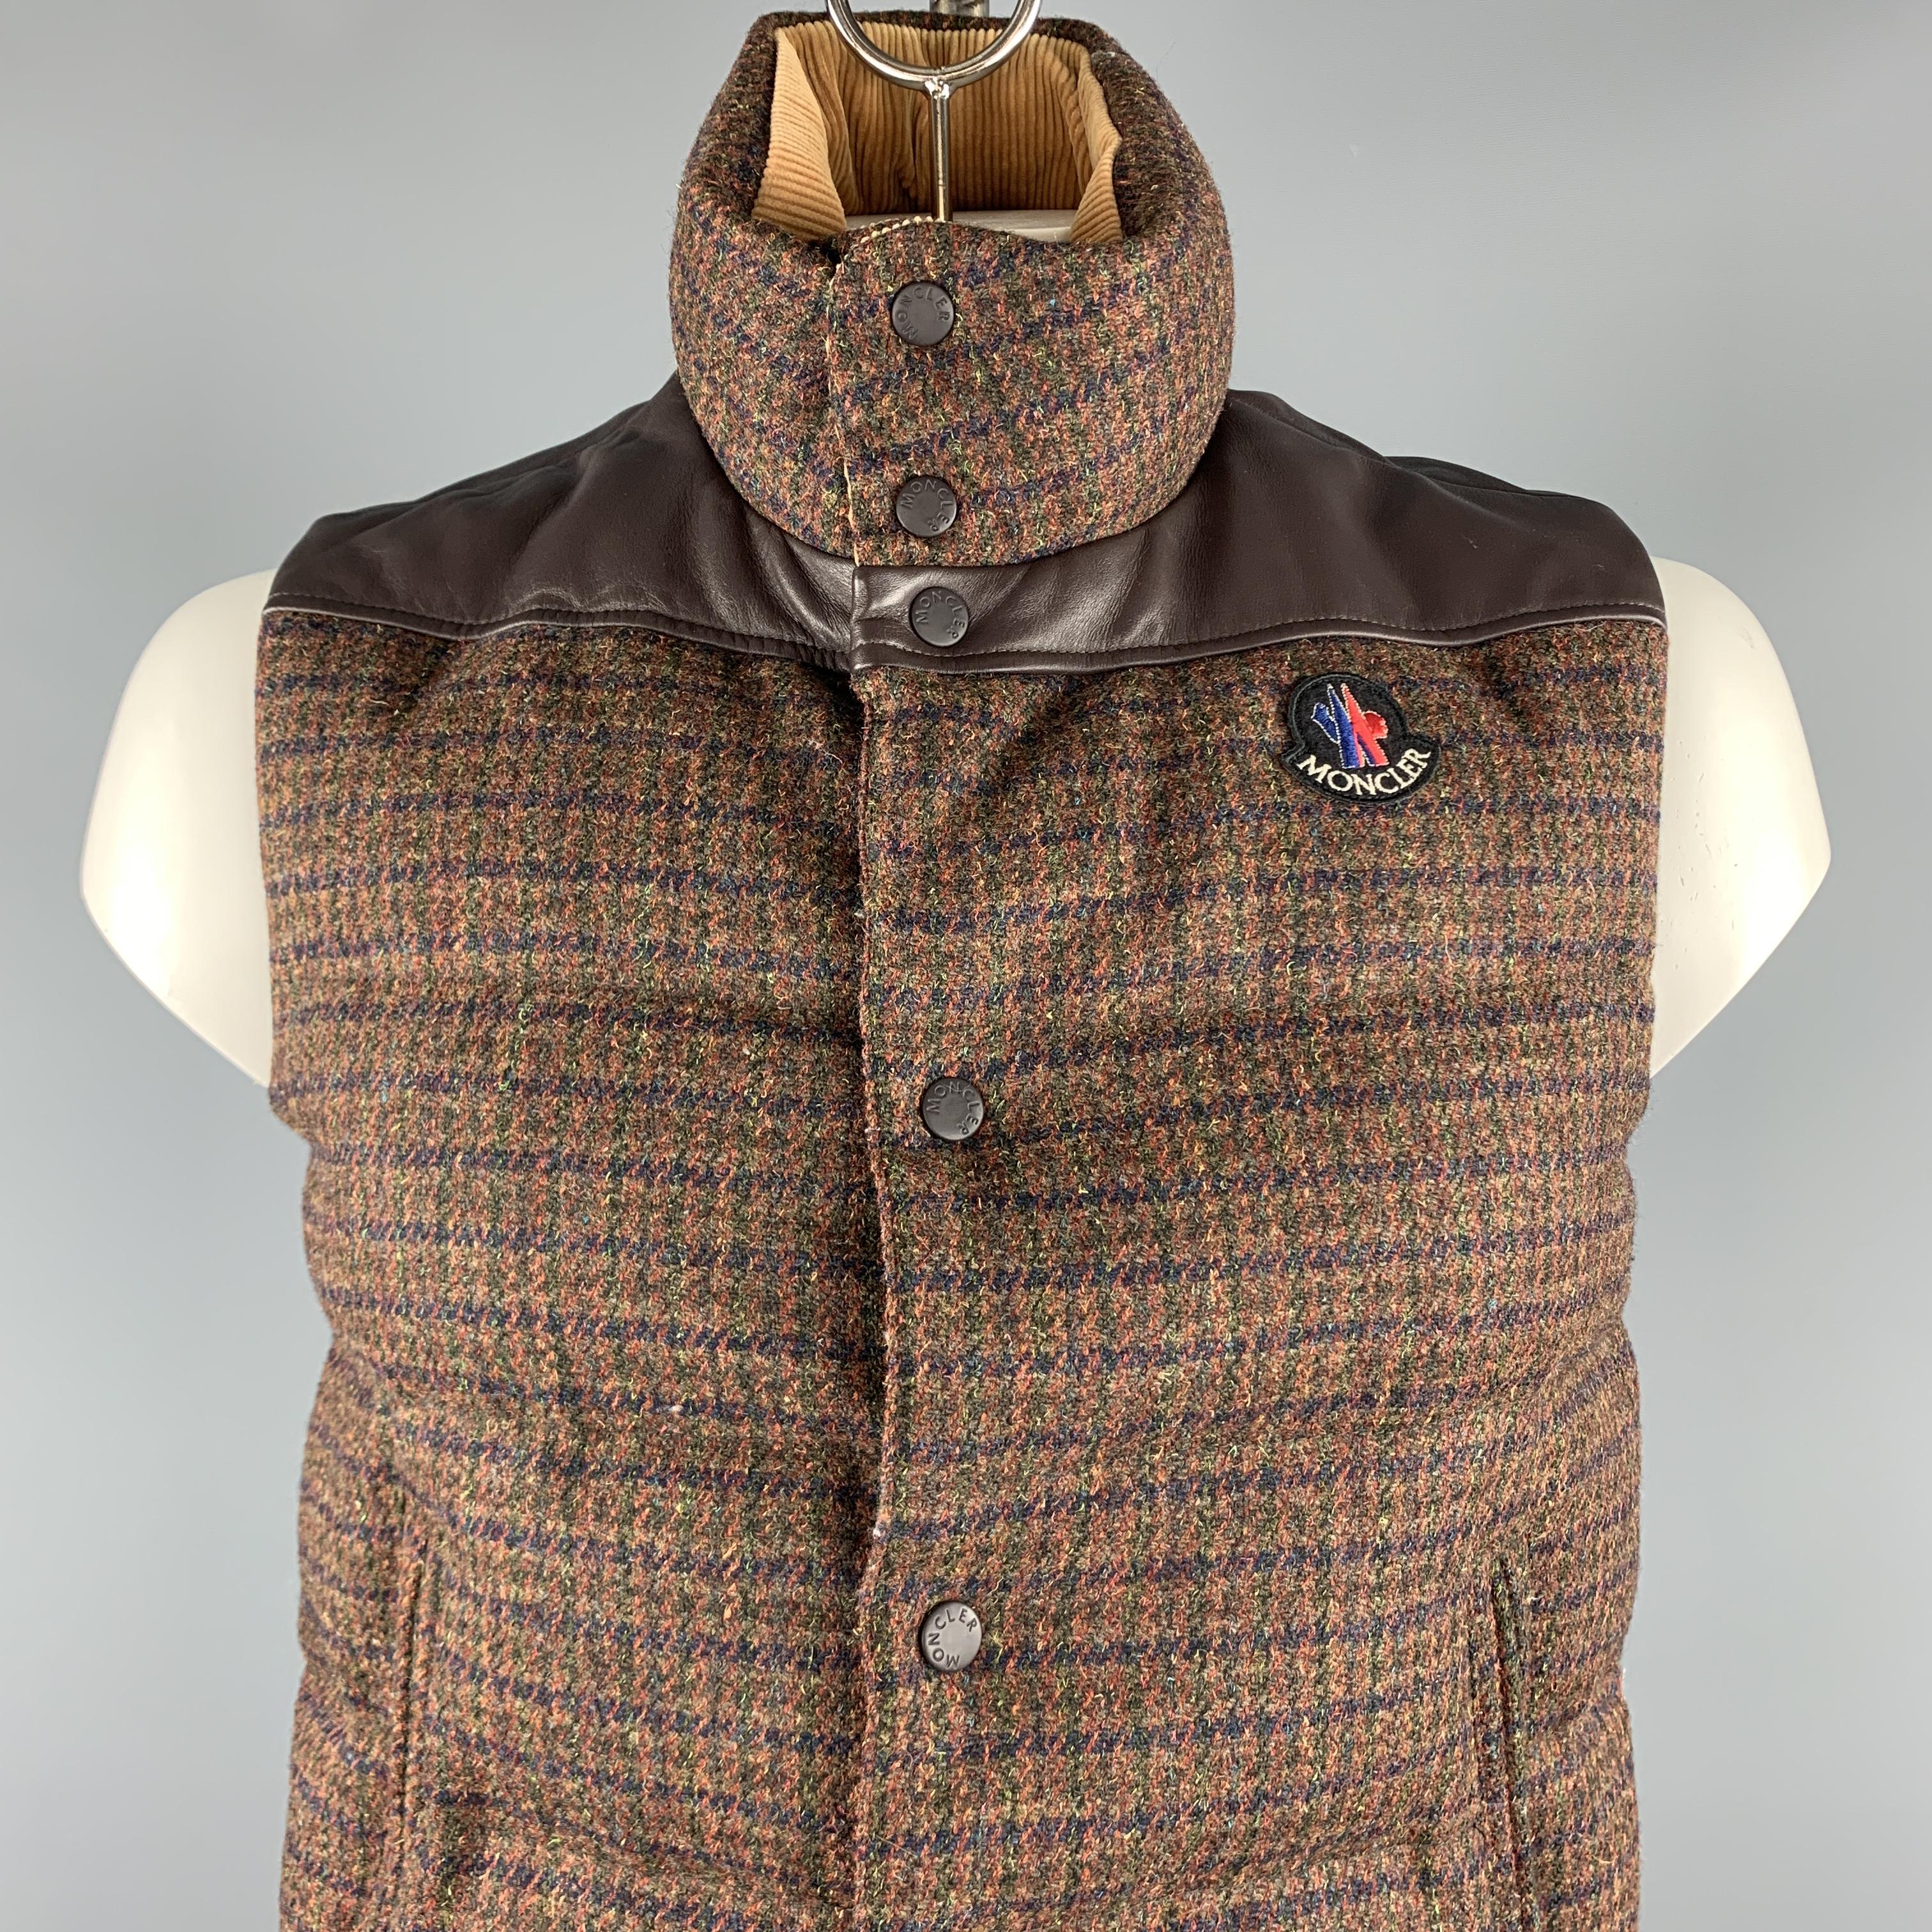 MONCLER x JUNYA WATANABE vest comes in a brown tweed wool featuring a corduroy collar, leather trim, zipper pockets, green liner, and a zip & snap button closure.

Excellent Pre-Owned Condition.
Marked: M

Measurements:

Shoulder: 16.5 in. 
Chest: